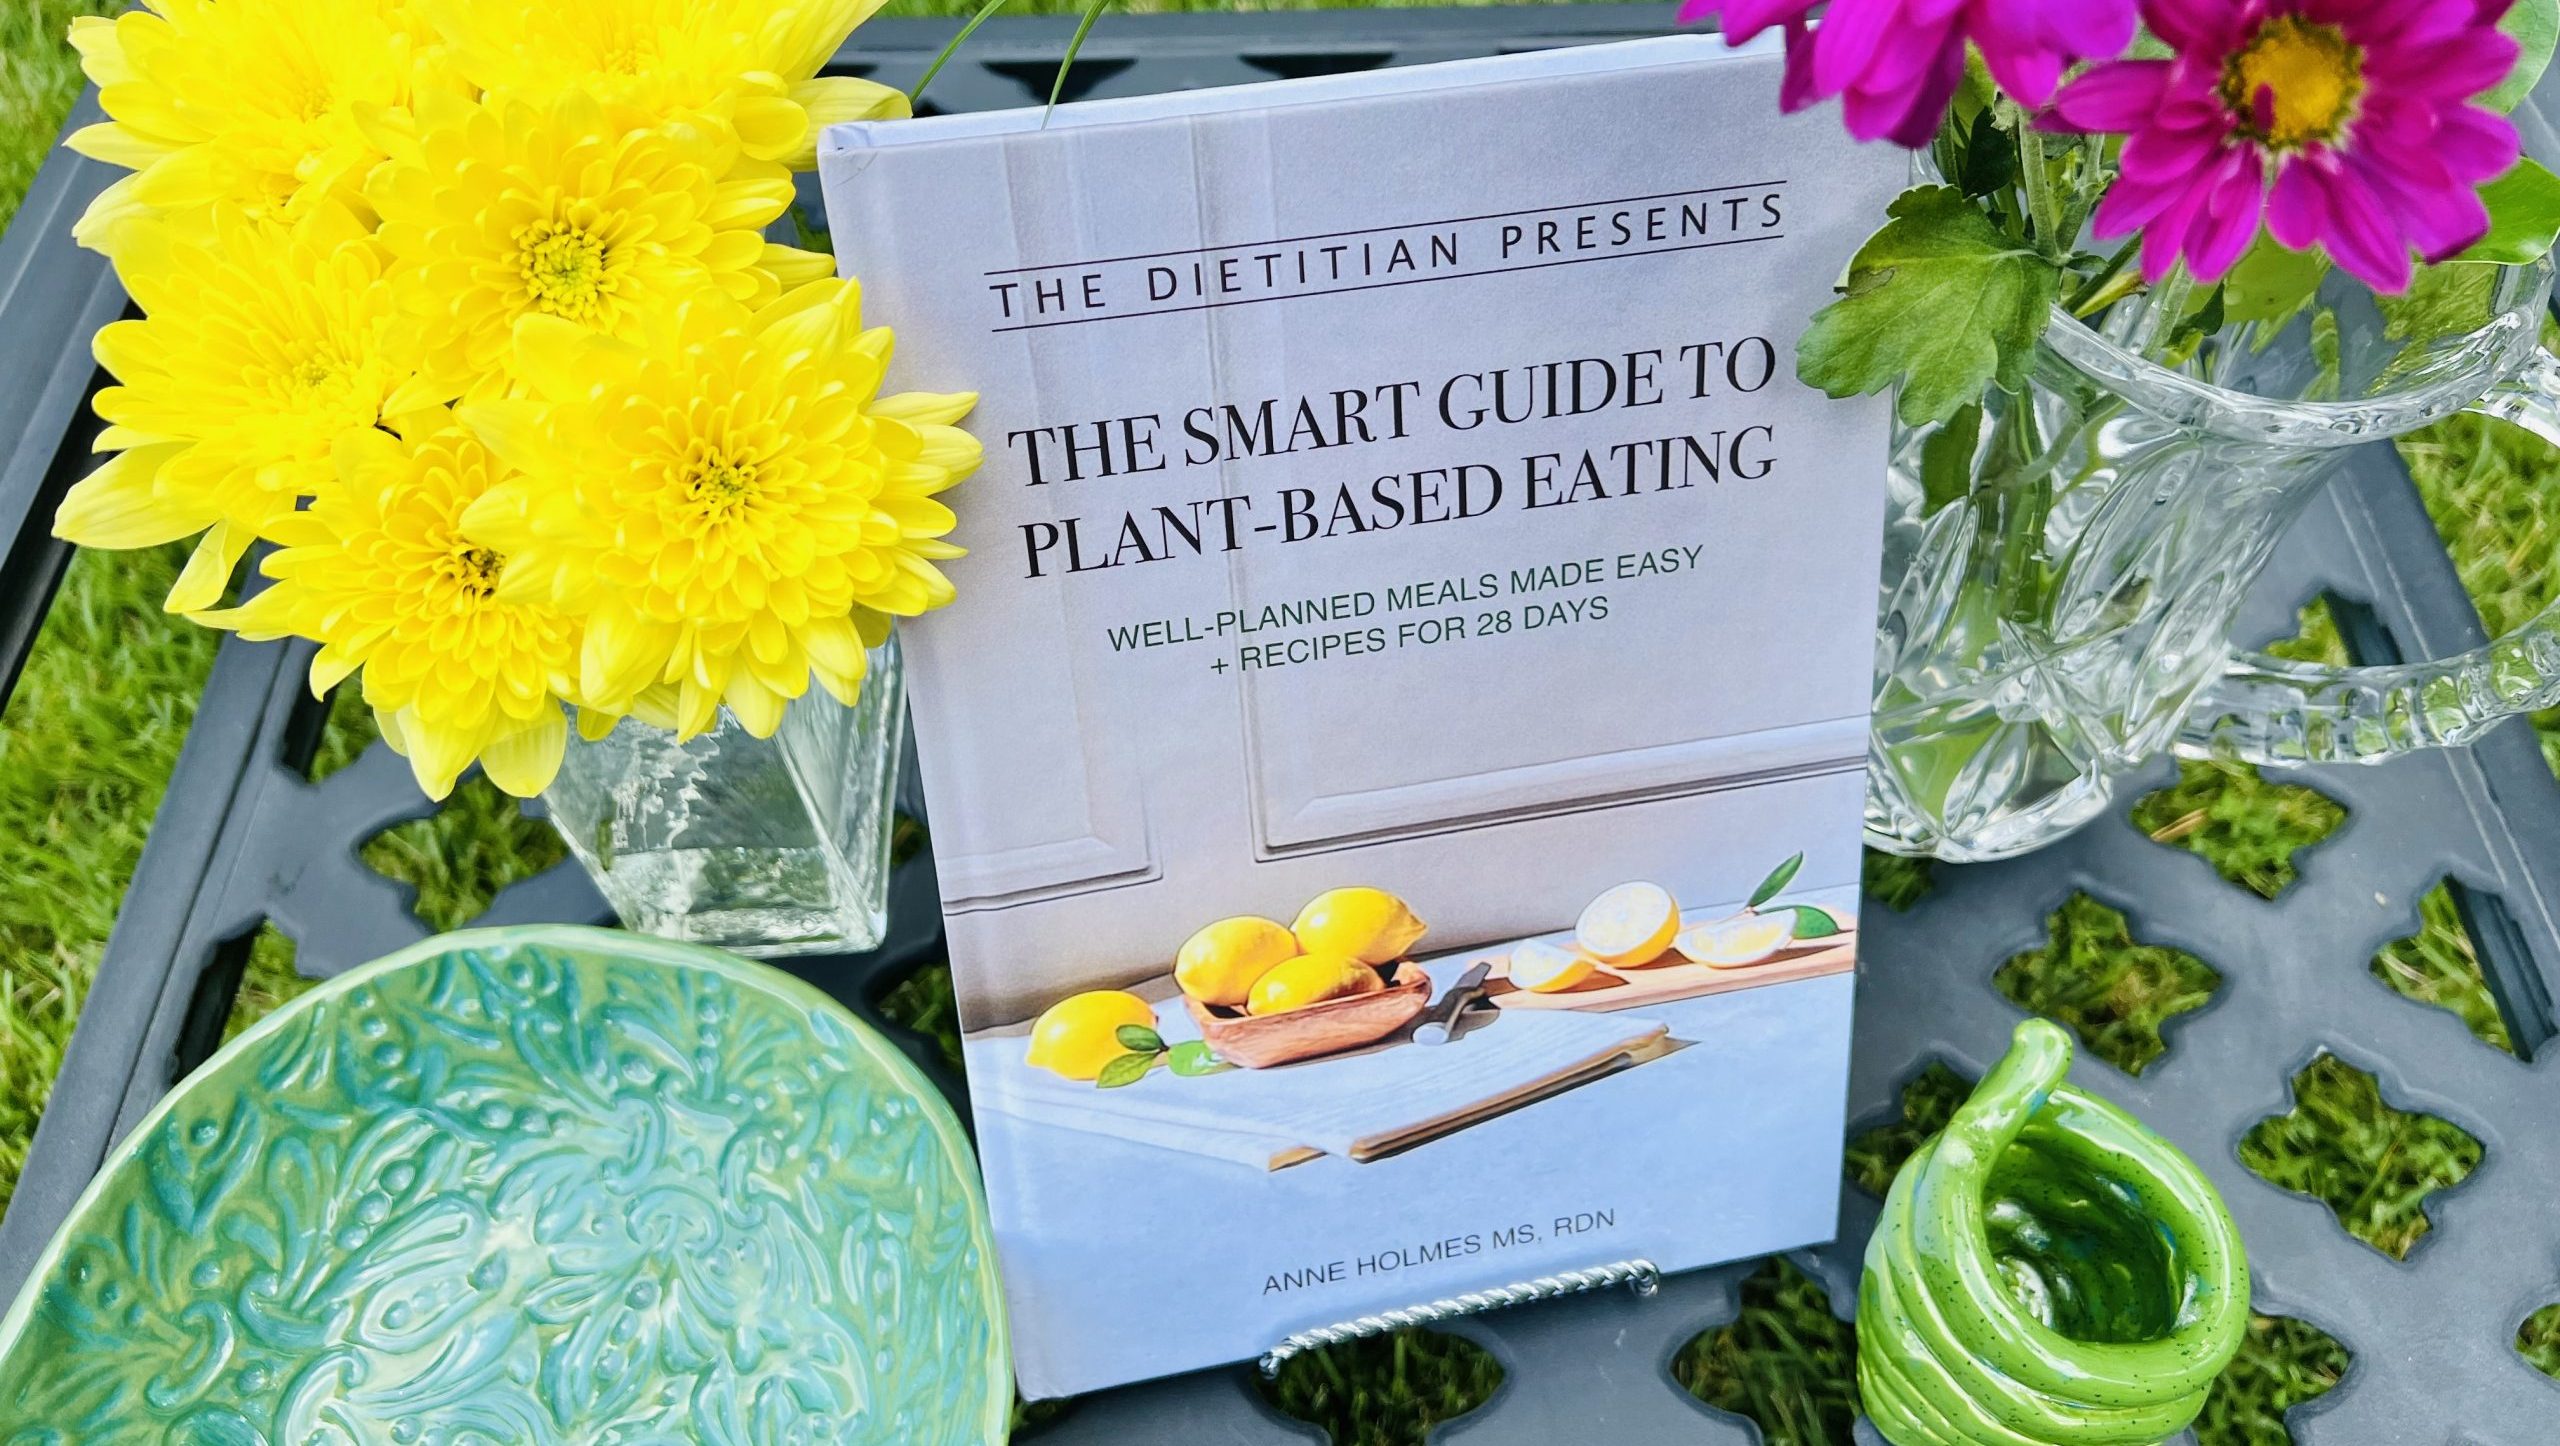 The Smart Guide To Plant-Based Eating